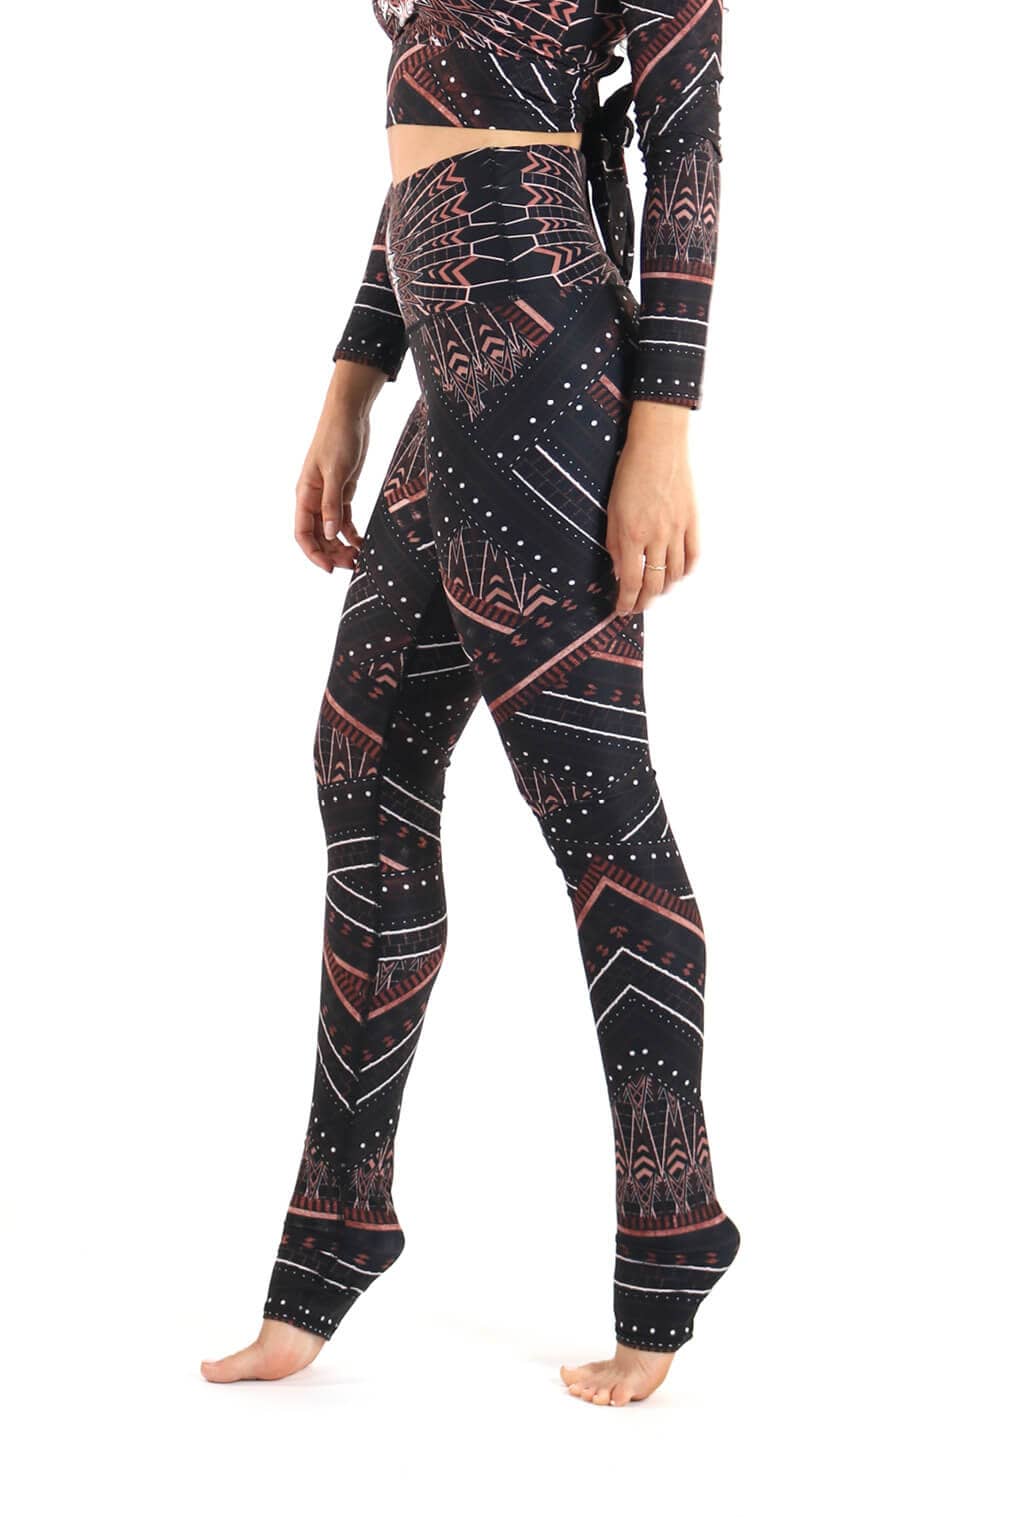 Great but modest Leggings for Sale by janraydesigns